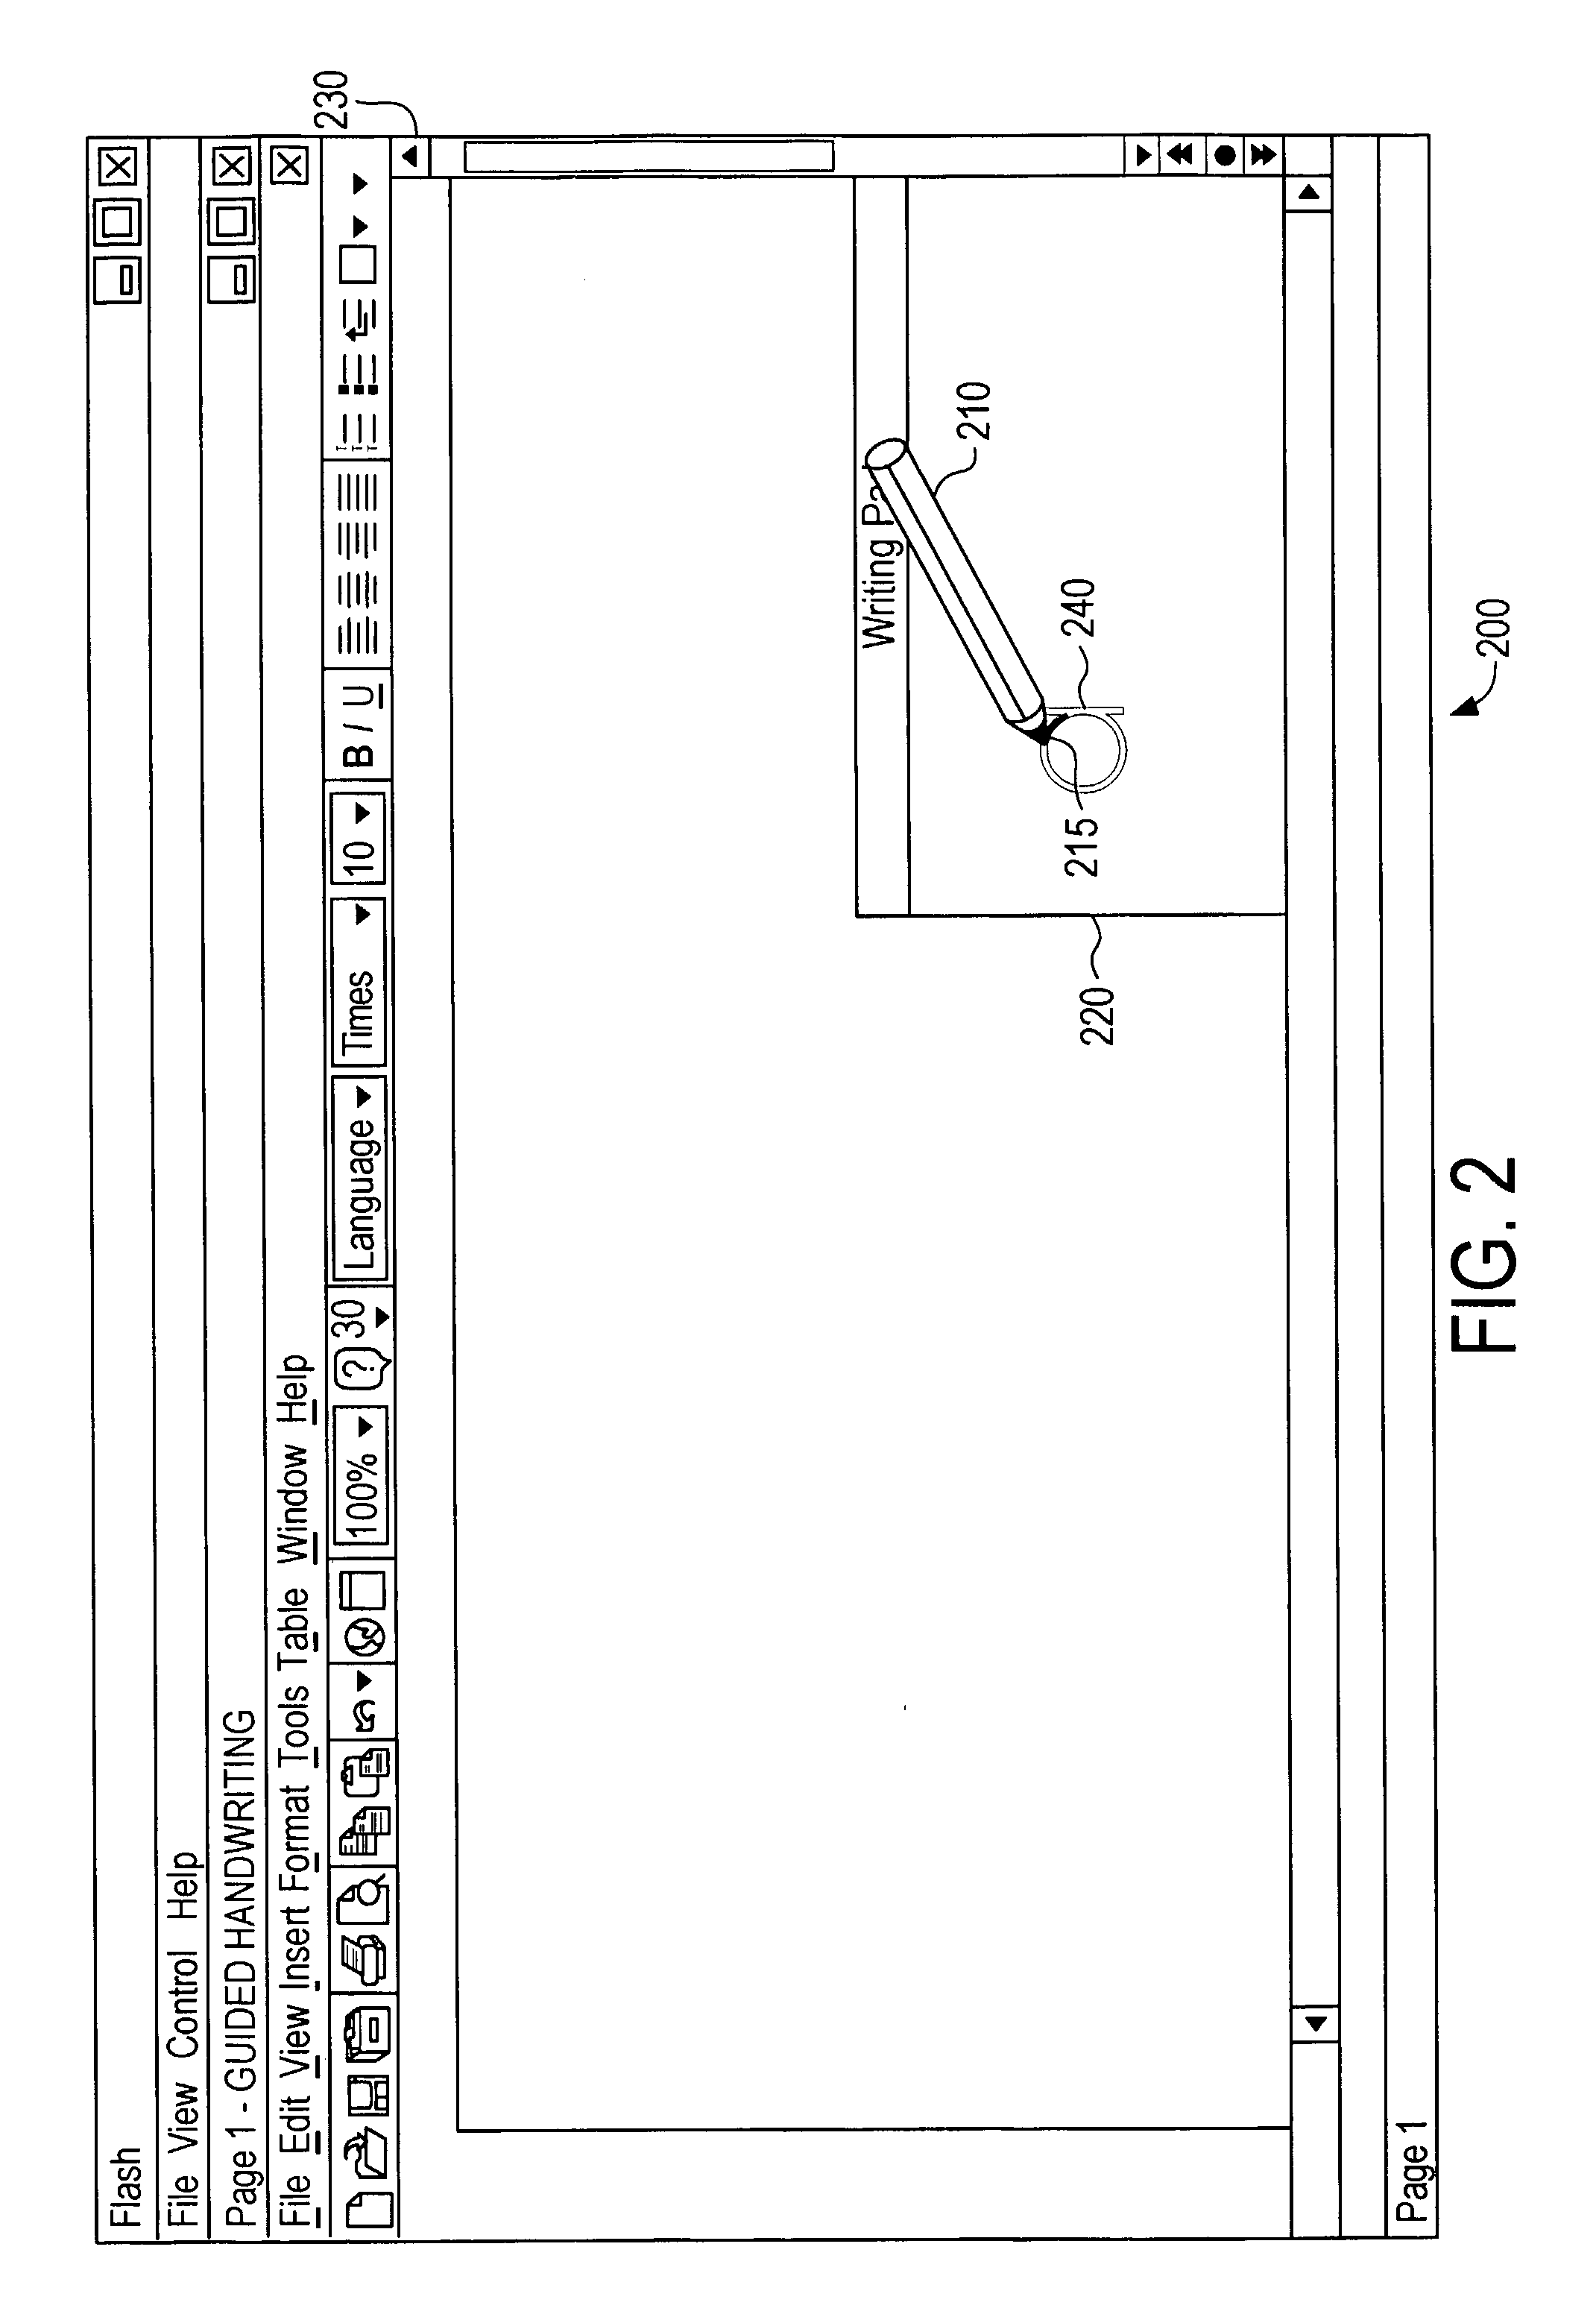 System, Method, and Apparatus for Continuous Character Recognition